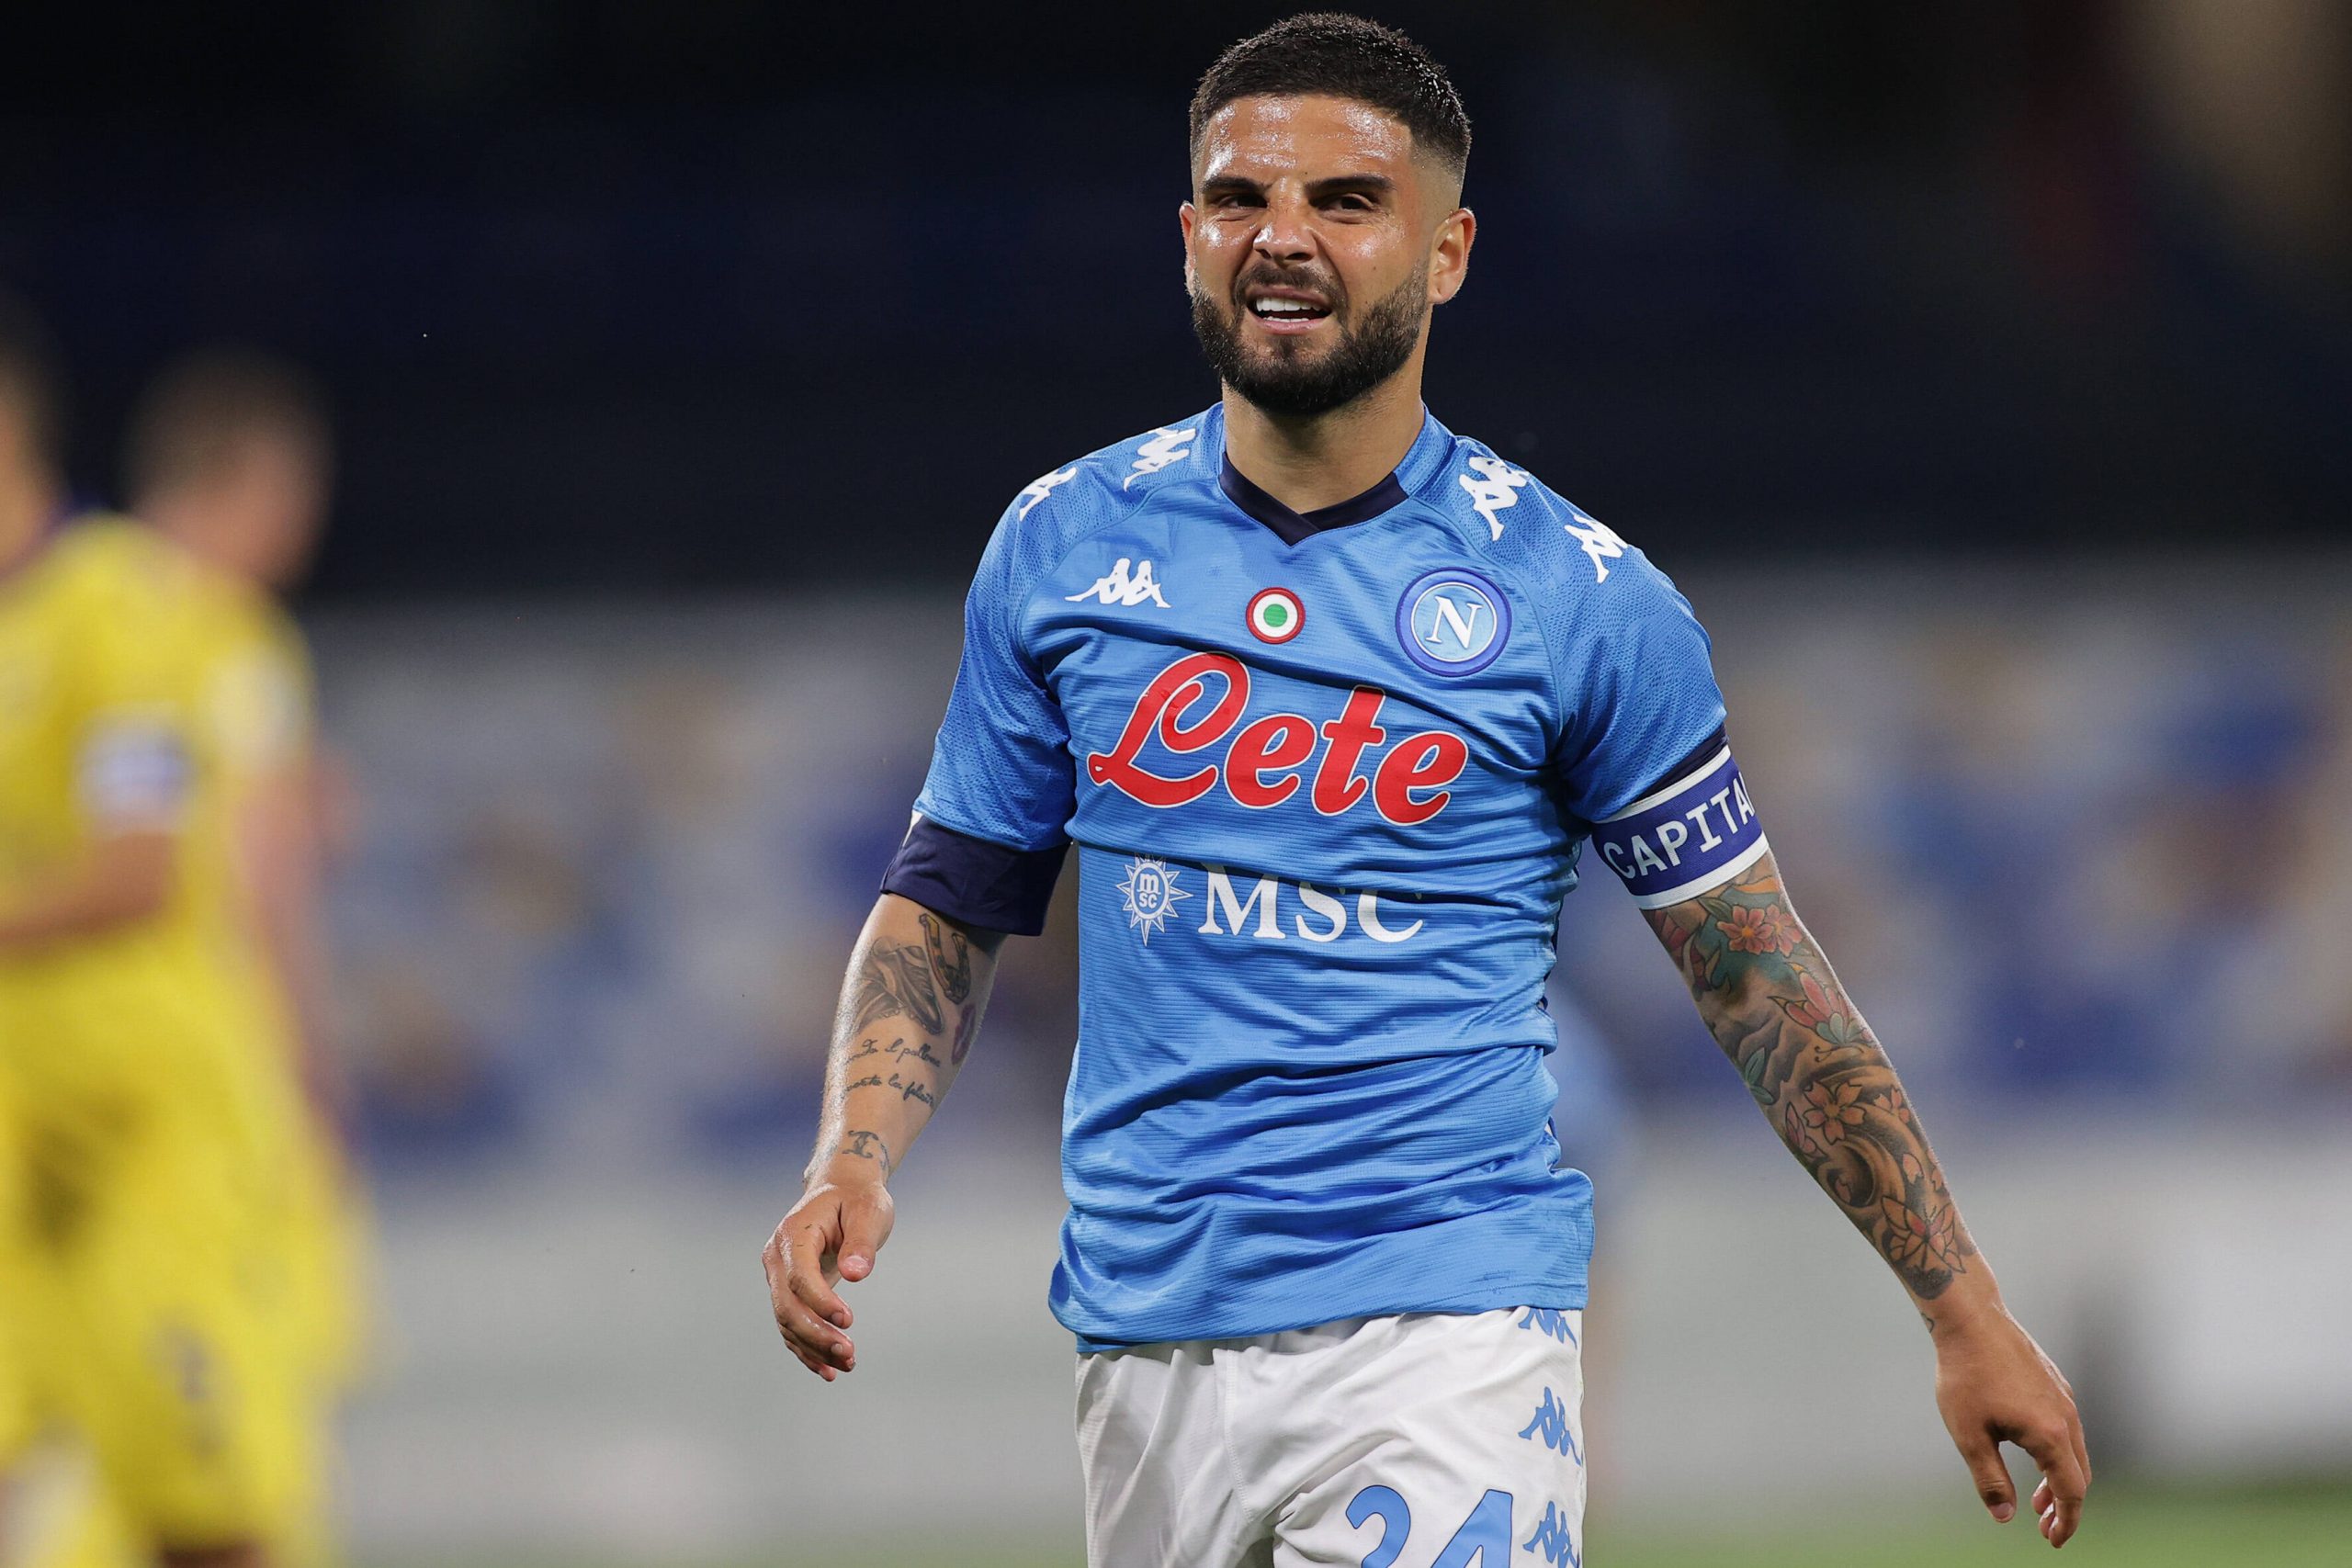 Lorenzo Insigne of SSC Napoli is one of the top players in Serie A. Photo Cesare Purini